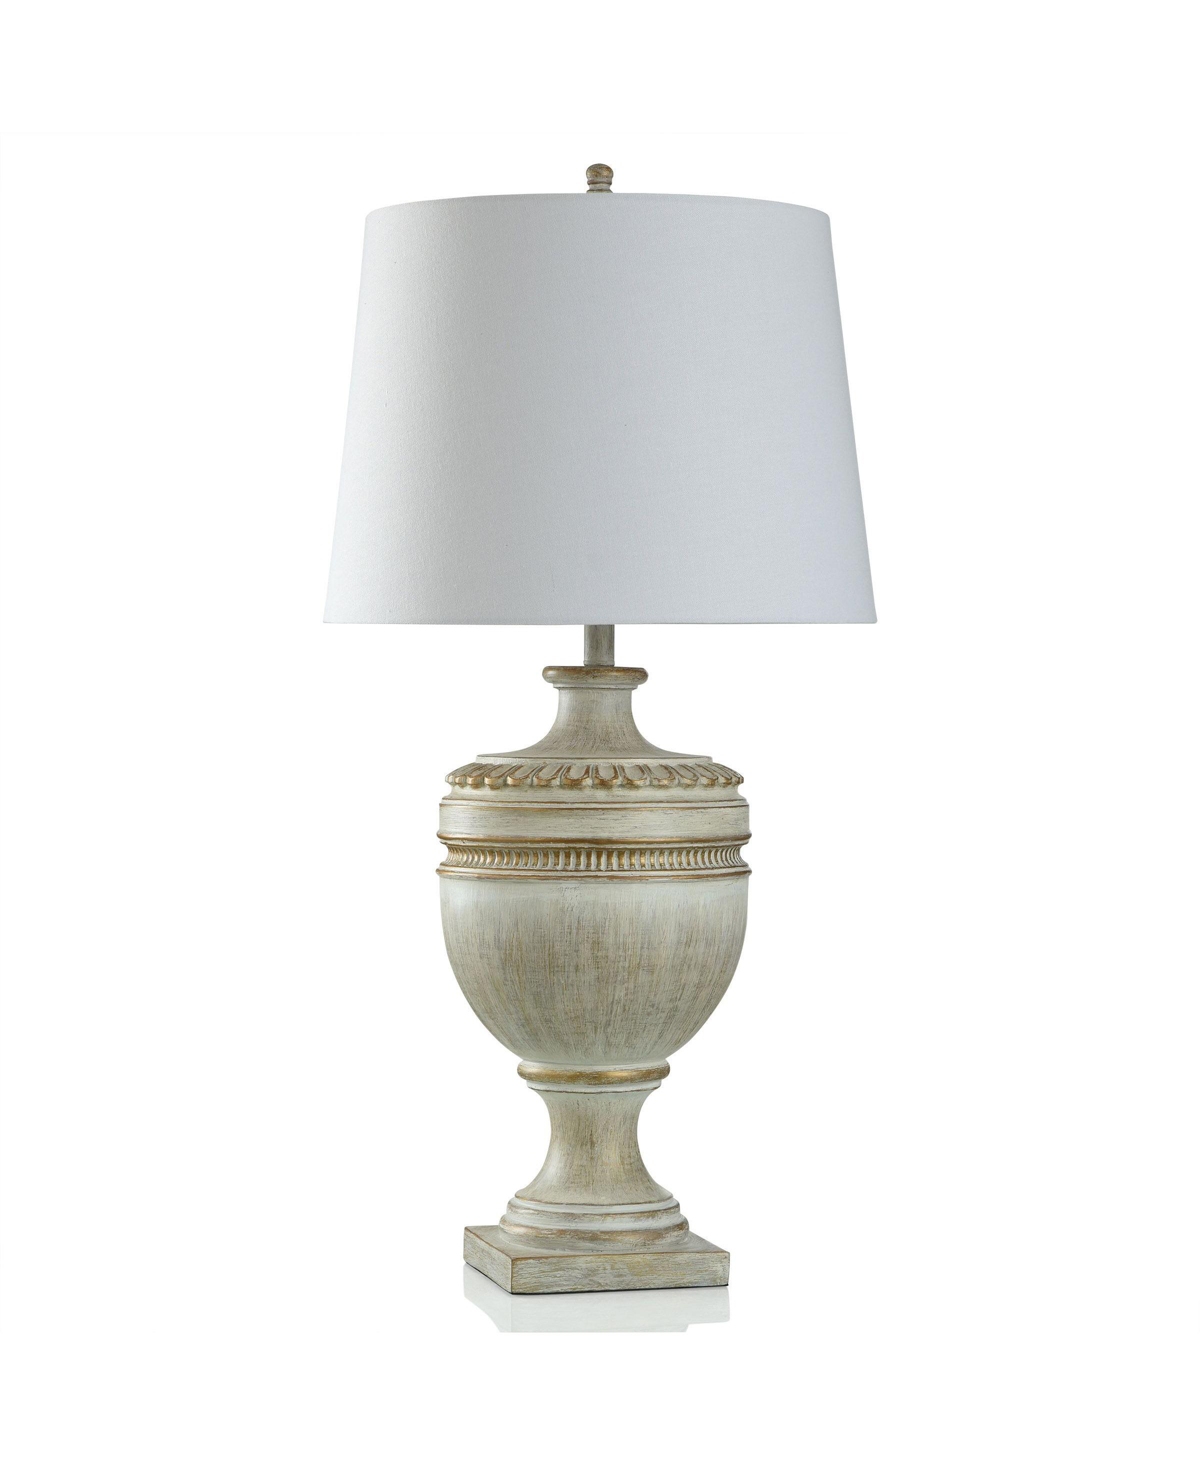 Stylecraft Home Collection 36" Malta And Classic Brushed Table Lamp In Washed Cream,gold